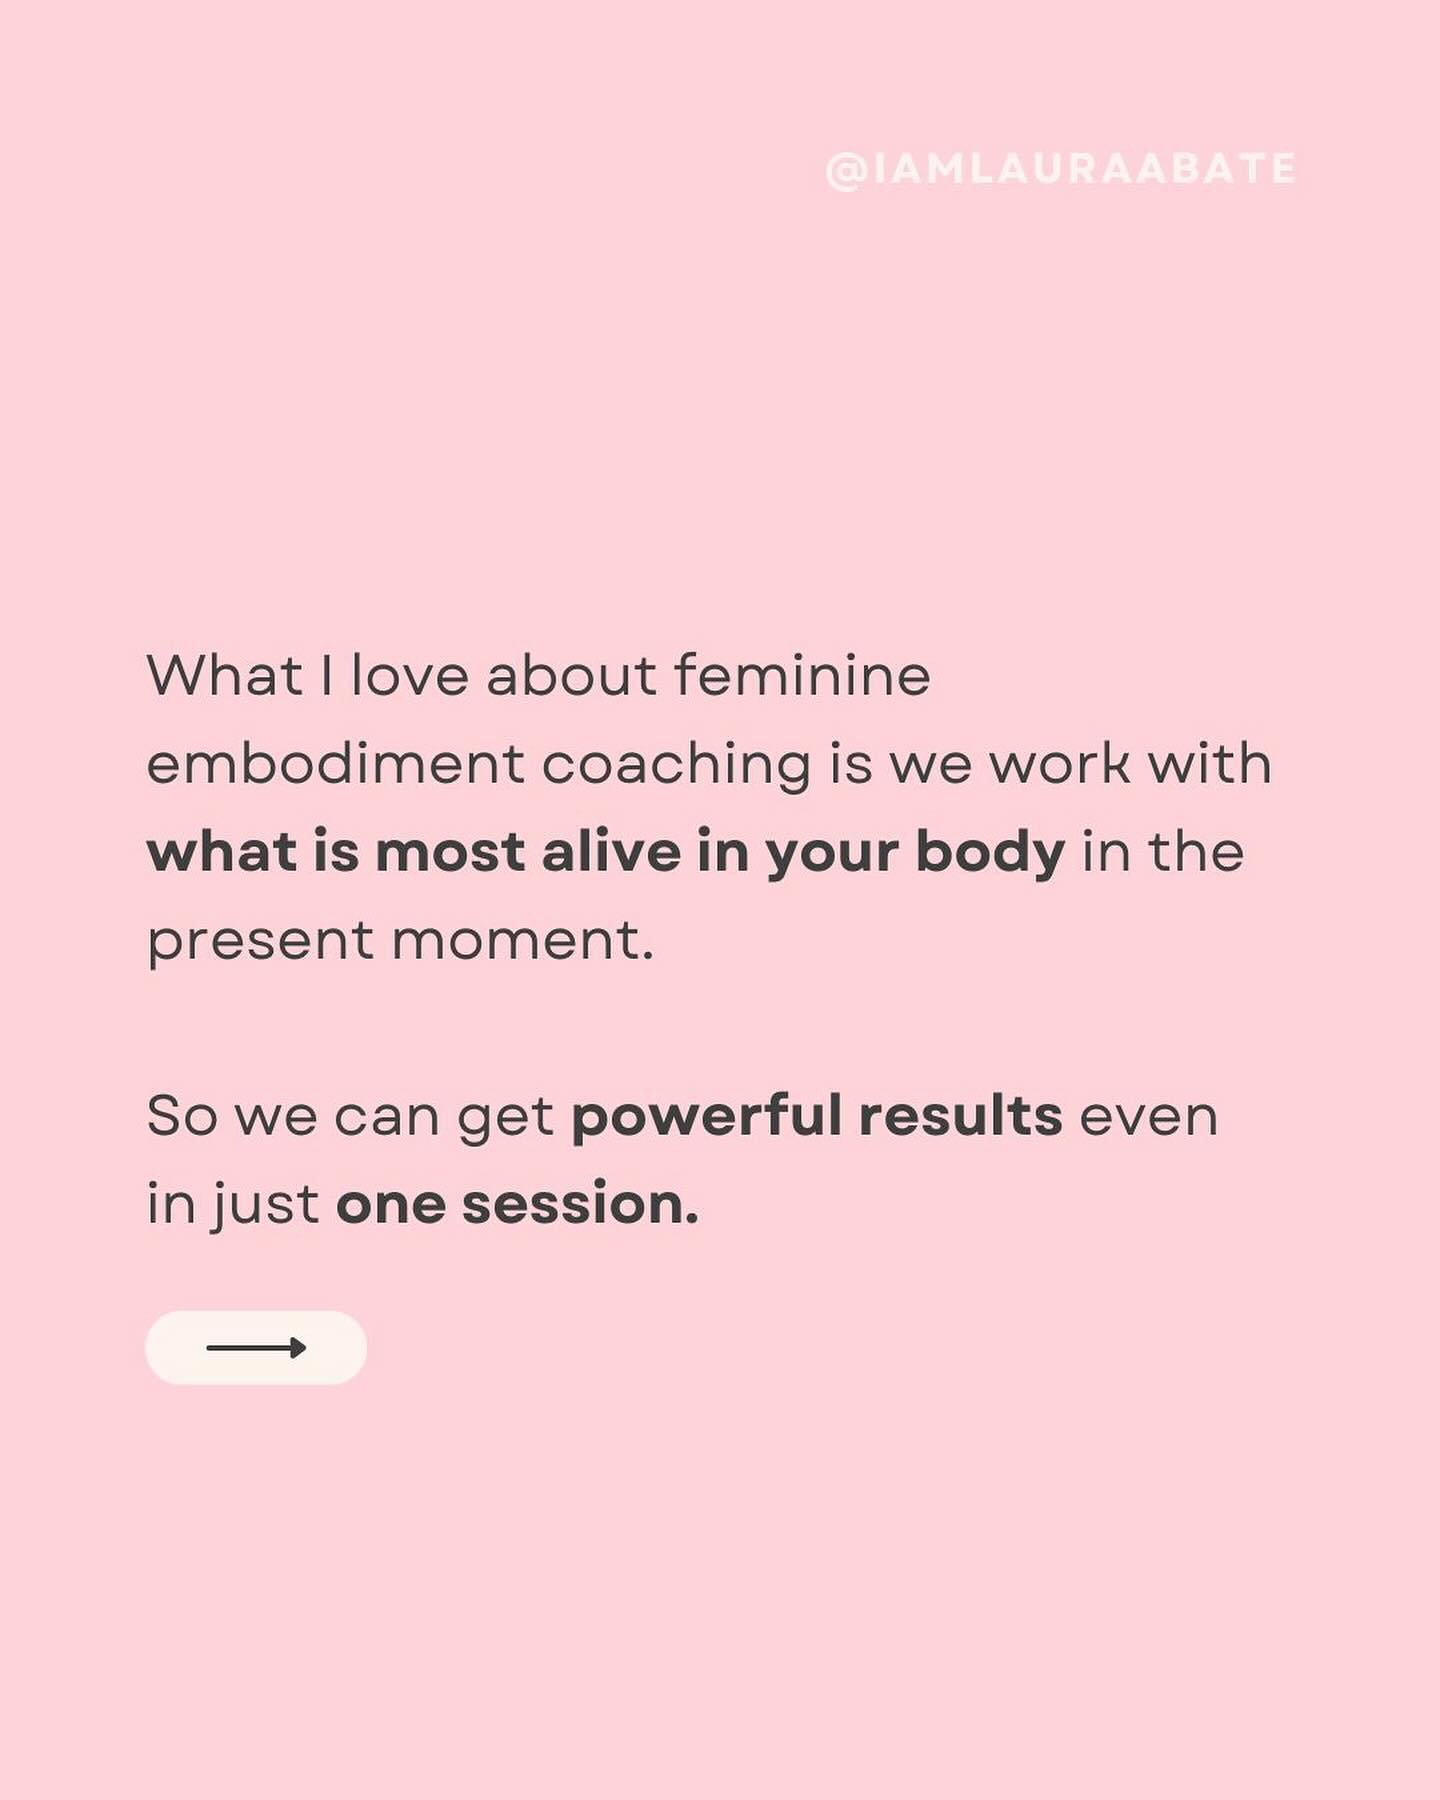 🩷 What I love about #feminineembodimentcoaching is we work with what is most alive in your body in the present moment.⁠
⁠
So we can get powerful results even in just 1️⃣ session. ⁠
⁠
Unlike traditional therapy, which often asks for so much info from